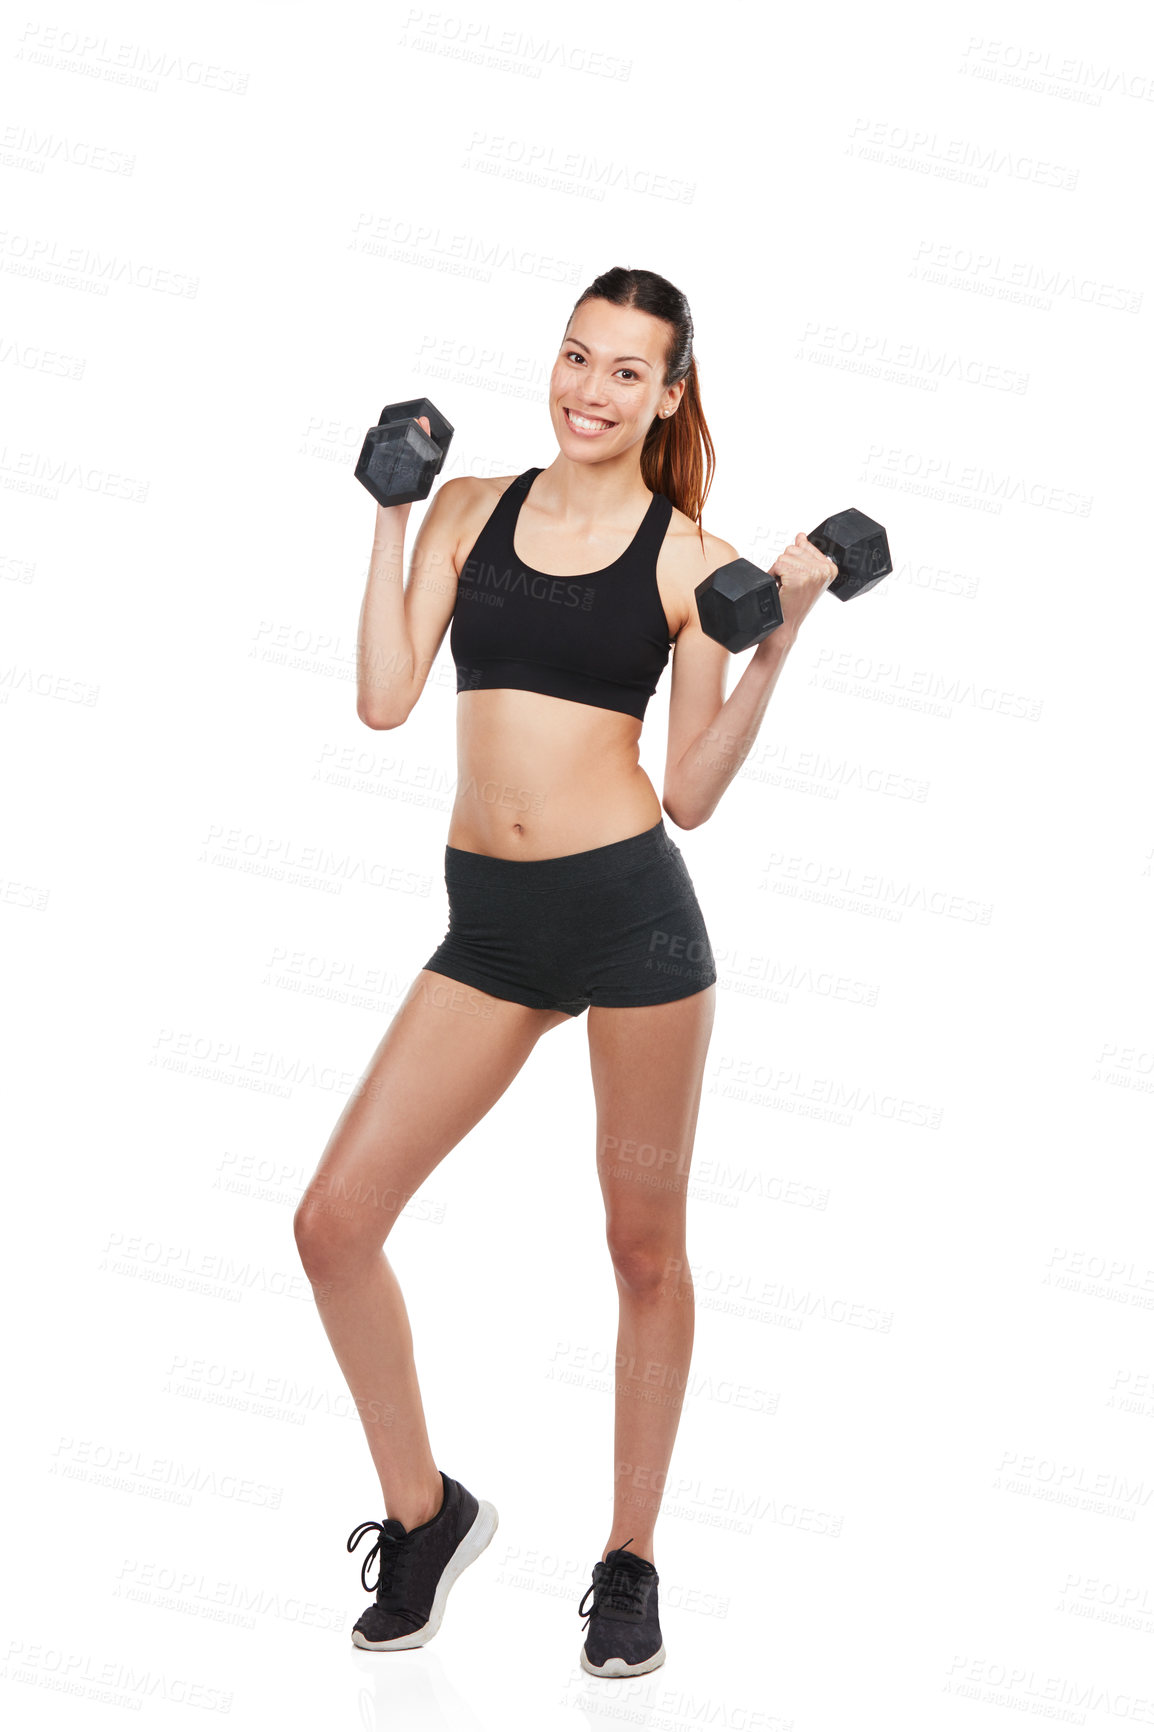 Buy stock photo Studio shot of a young woman working out with dumbbells against a white background